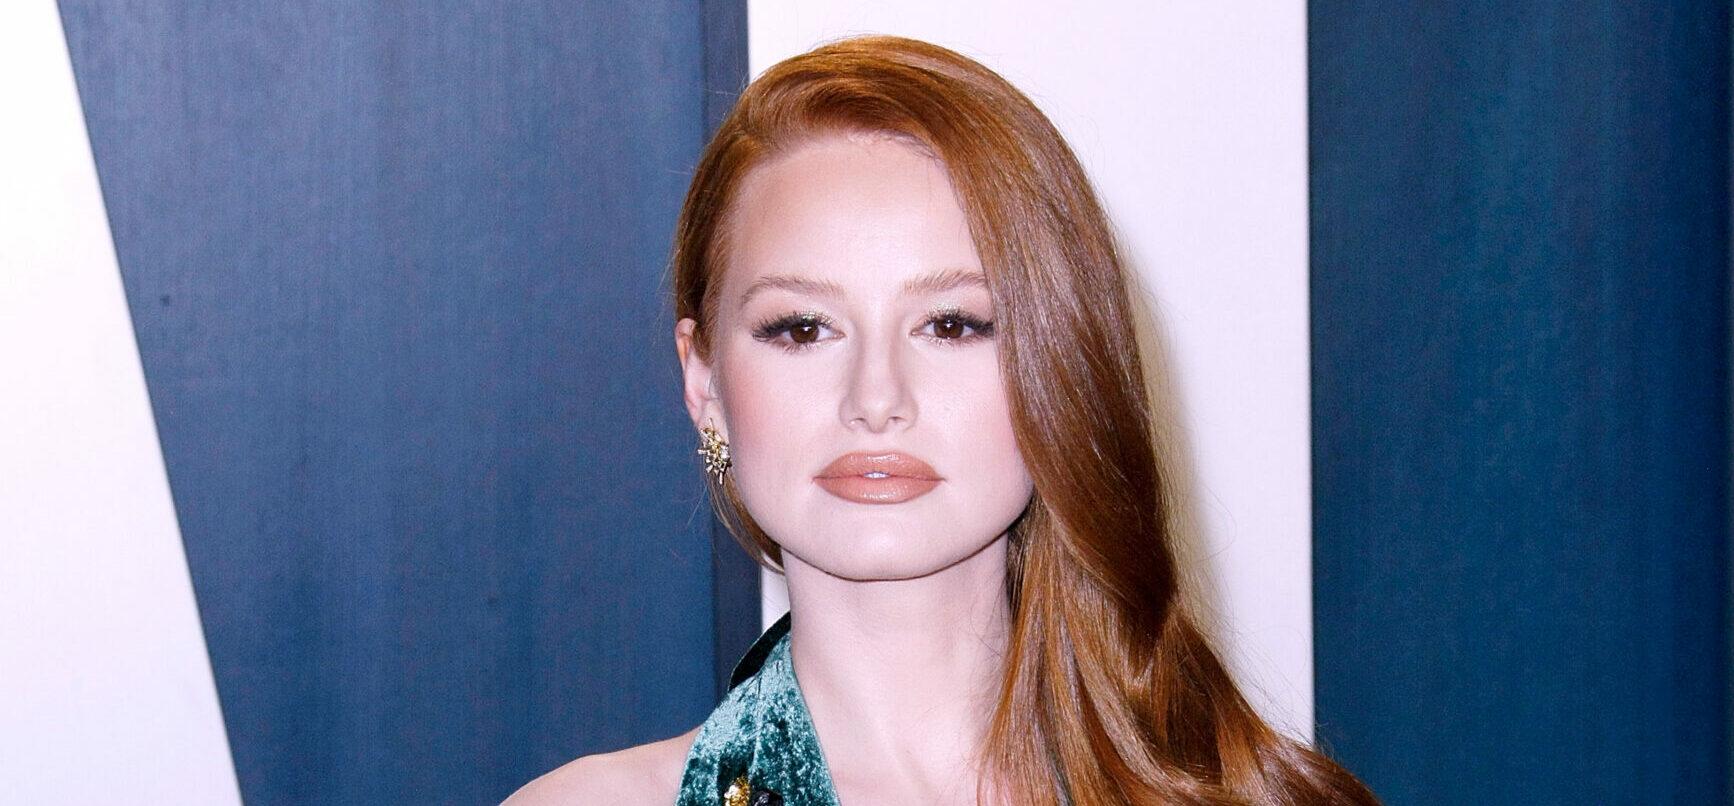 ‘Riverdale’ Actress Madelaine Petsch Brings The Sparkle For The Holidays